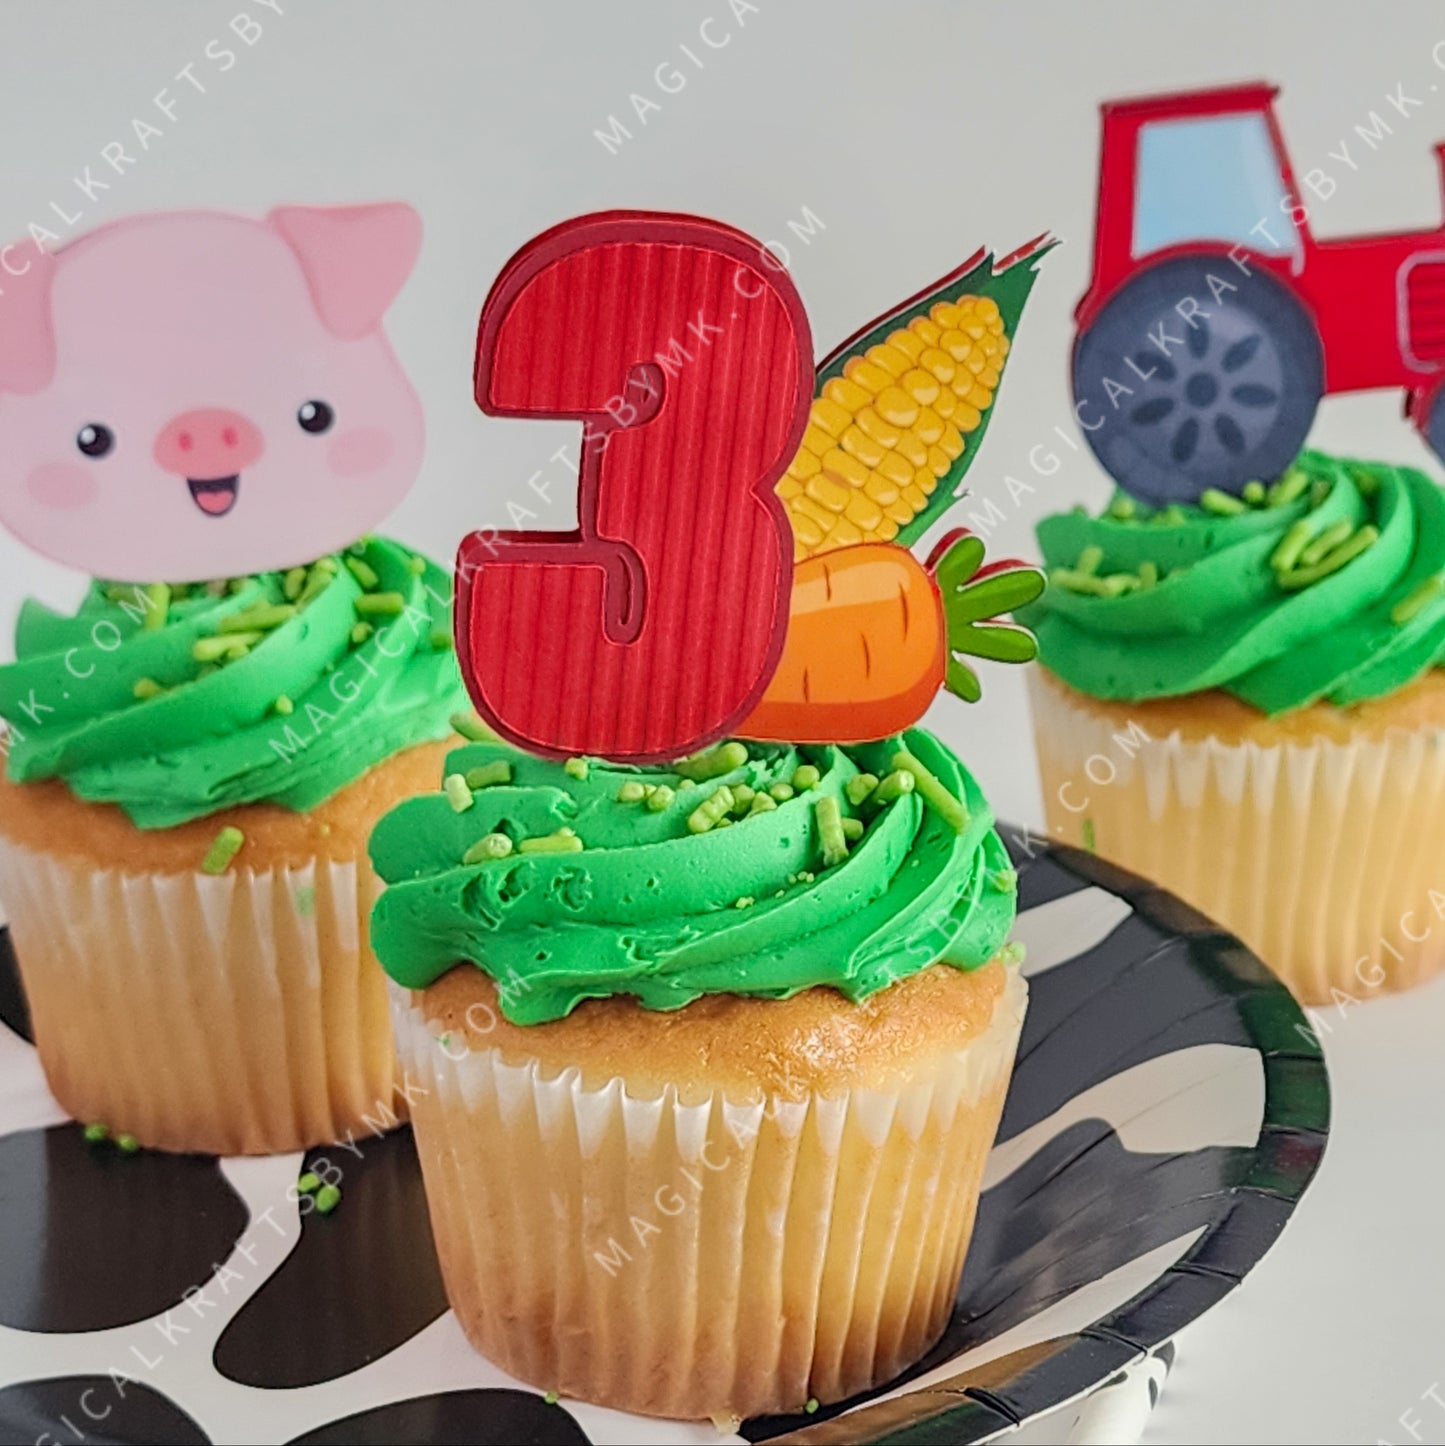 Lil' Farmer Cupcake Toppers